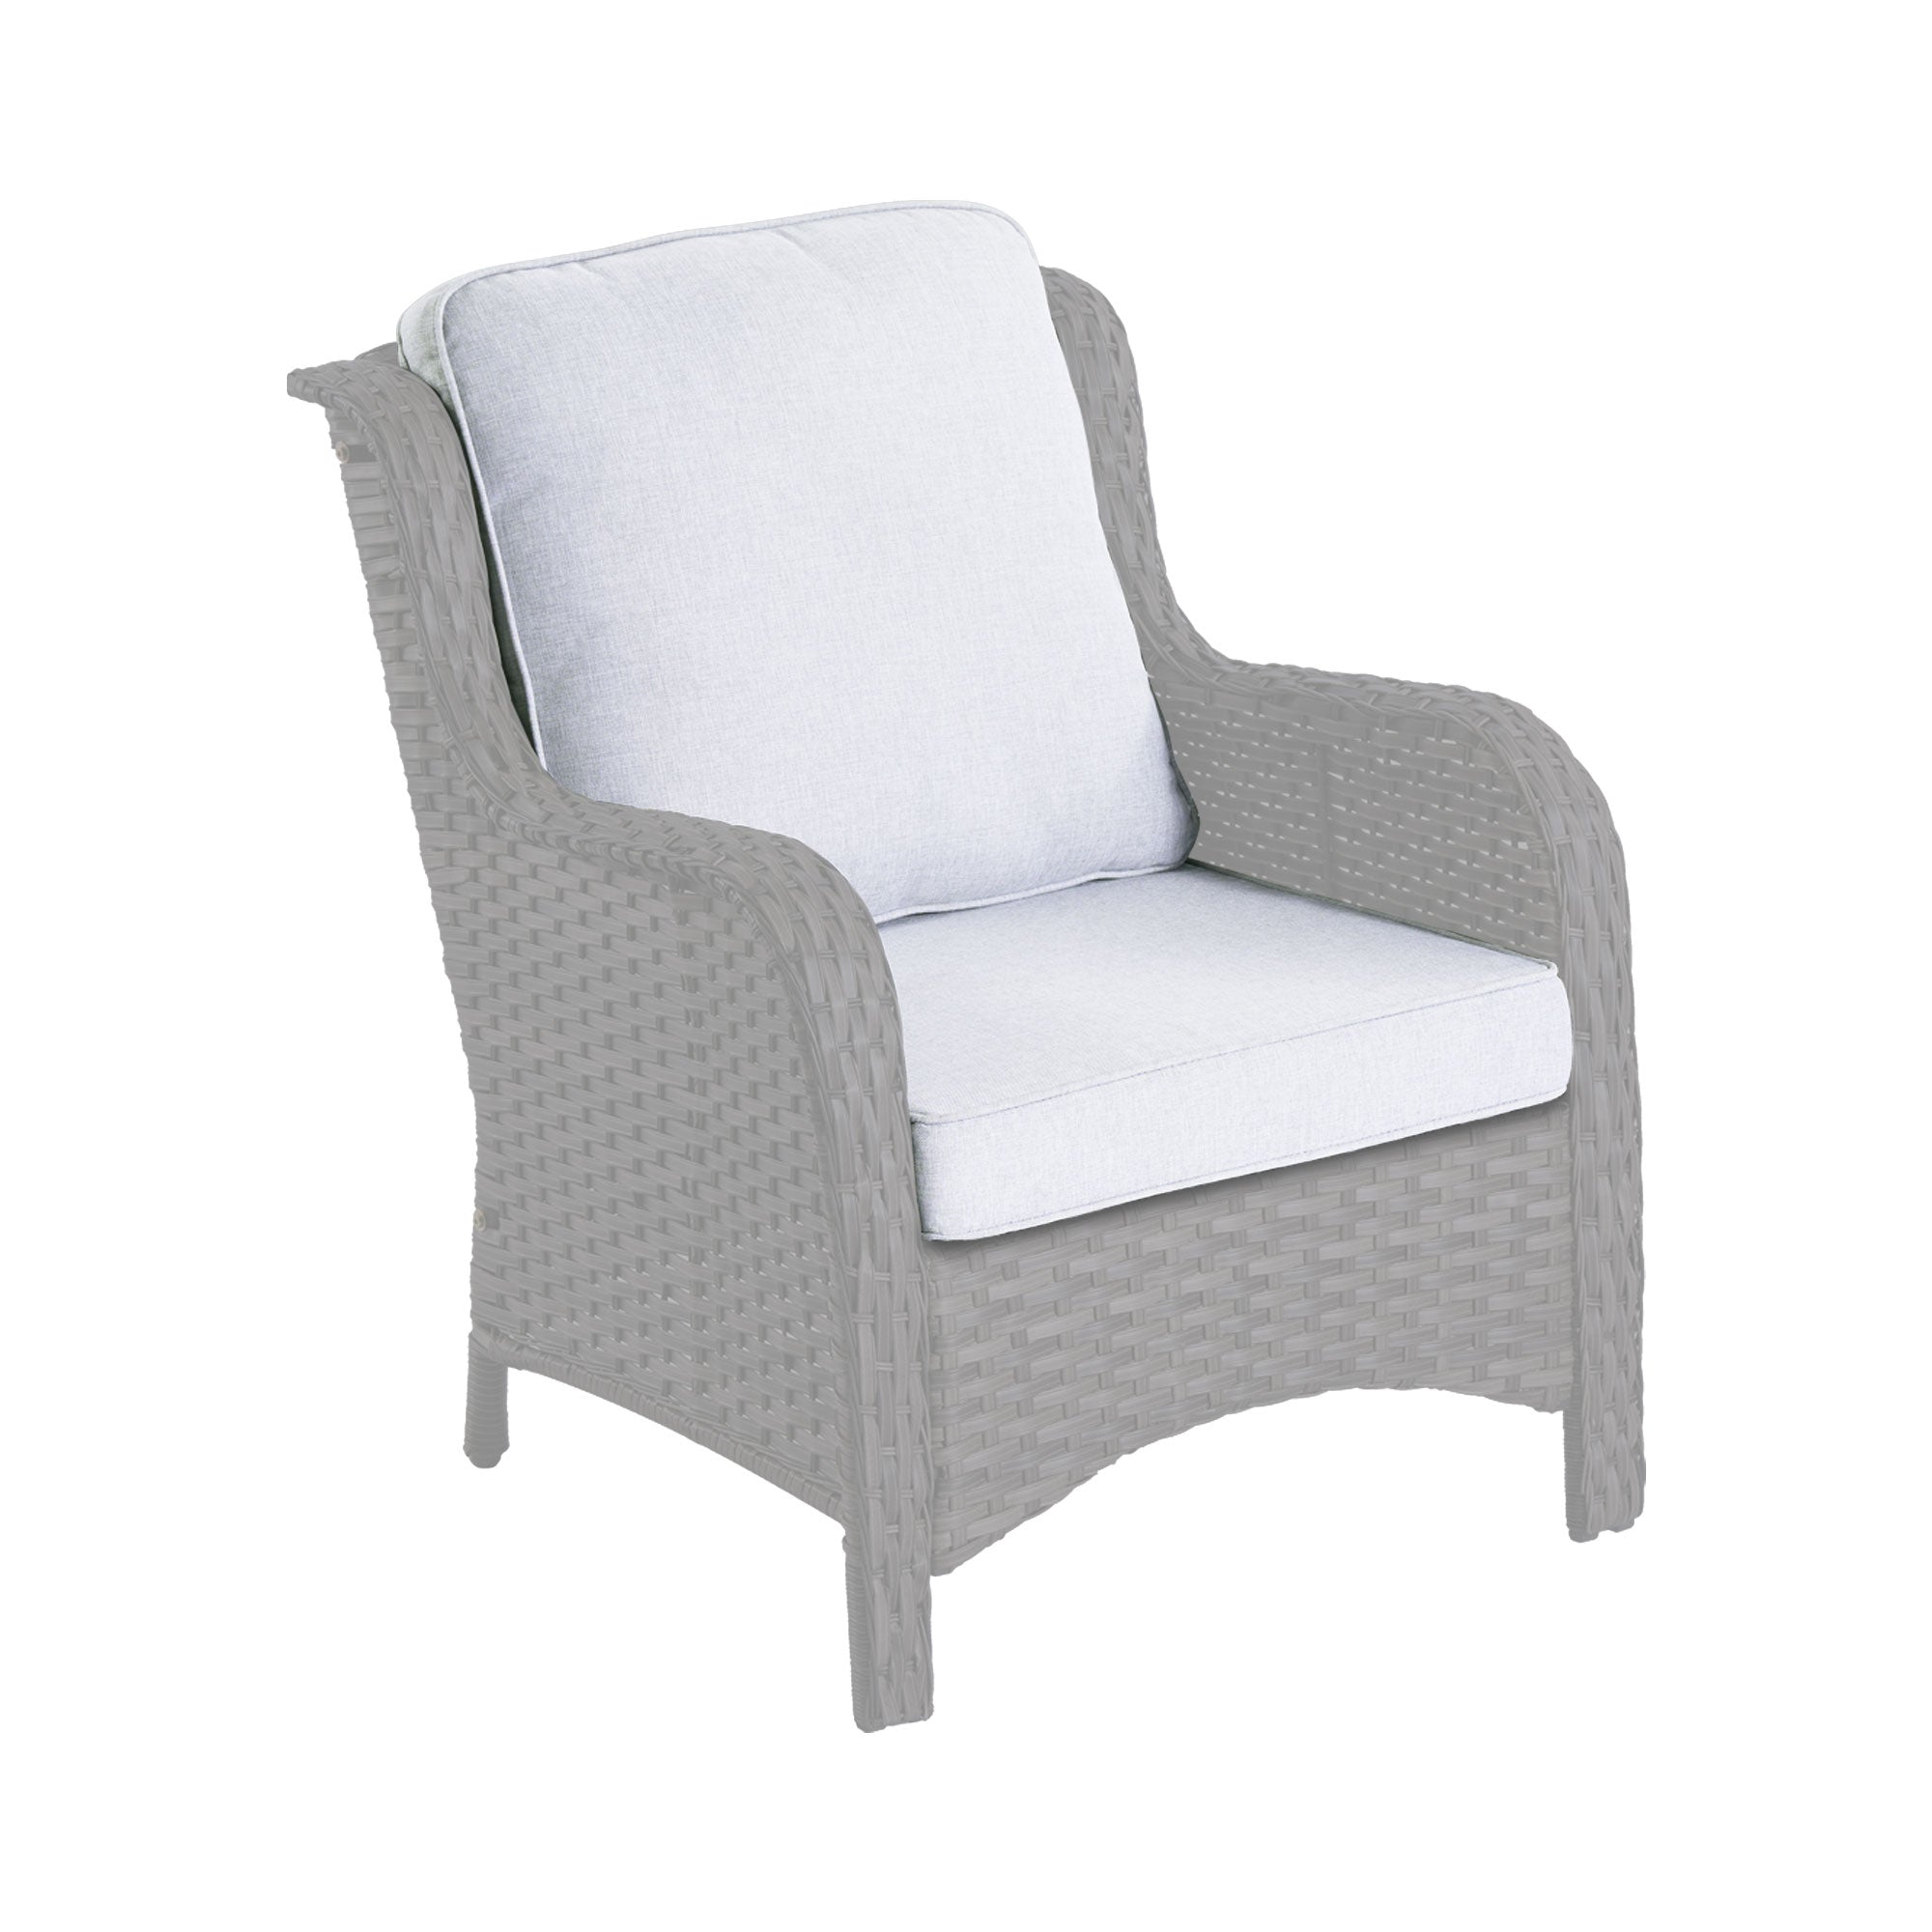 #Color_Light Grey|Type_Seat&Back Cushion